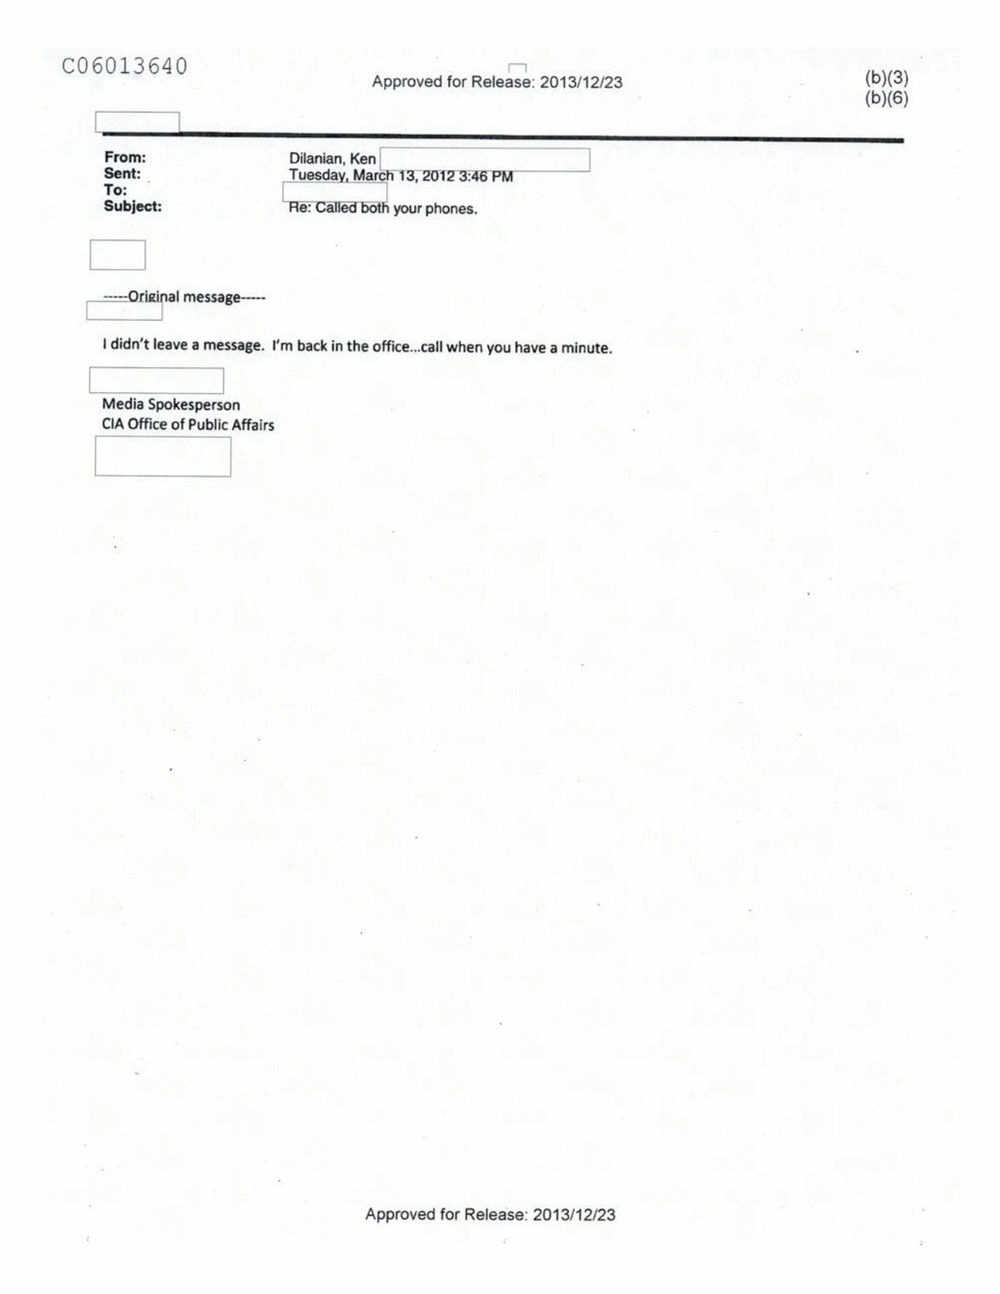 Page 479 from Email Correspondence Between Reporters and CIA Flacks